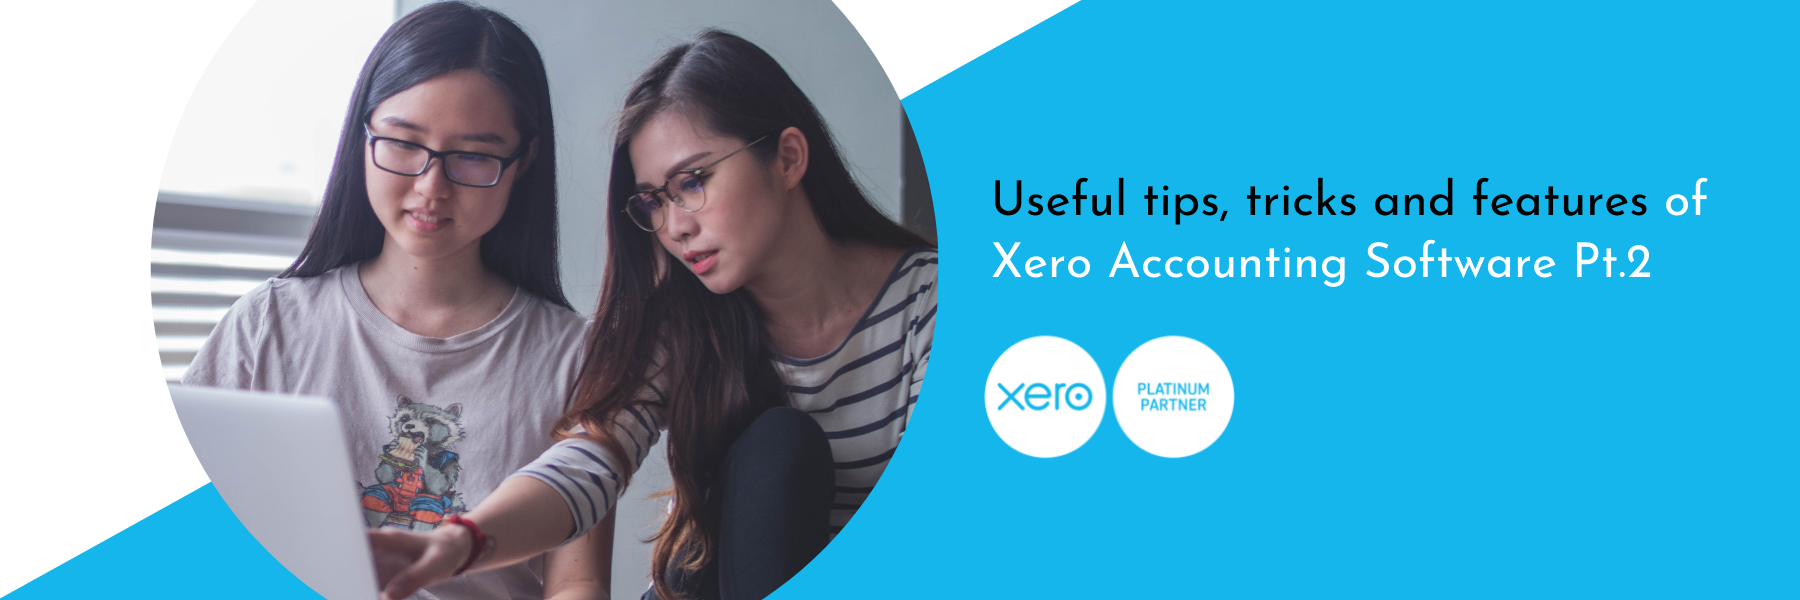 Tips, Tricks and Features of Xero Accounting Software Pt.2